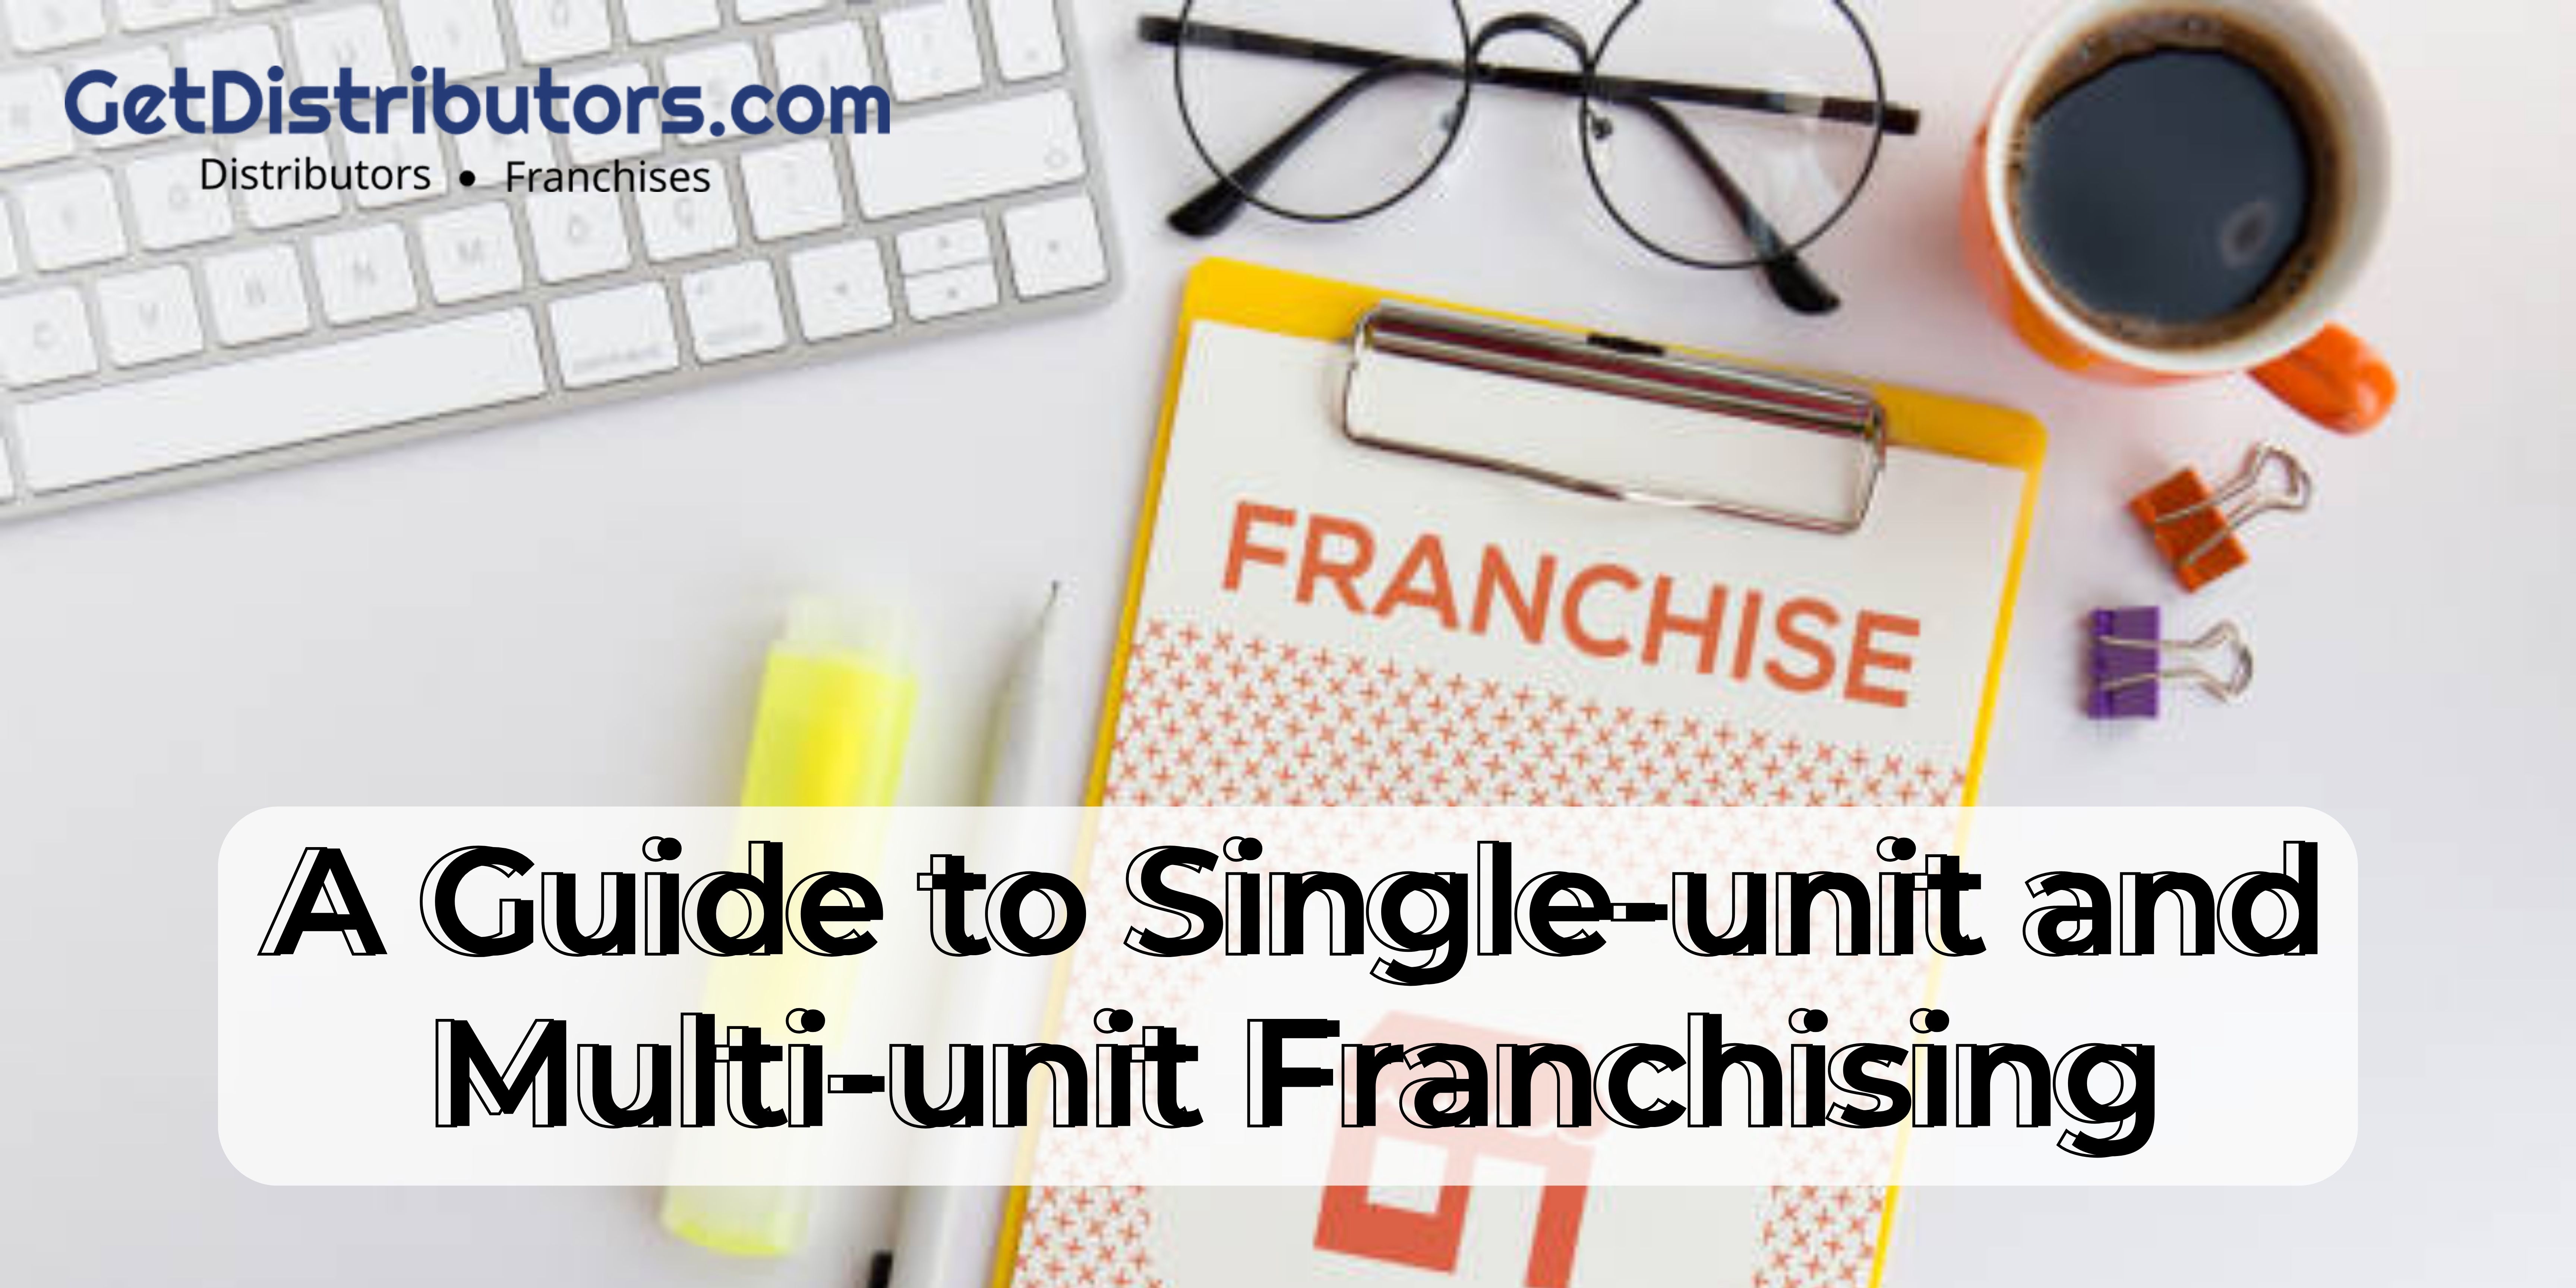 A Guide to Single-unit and Multi-unit Franchising